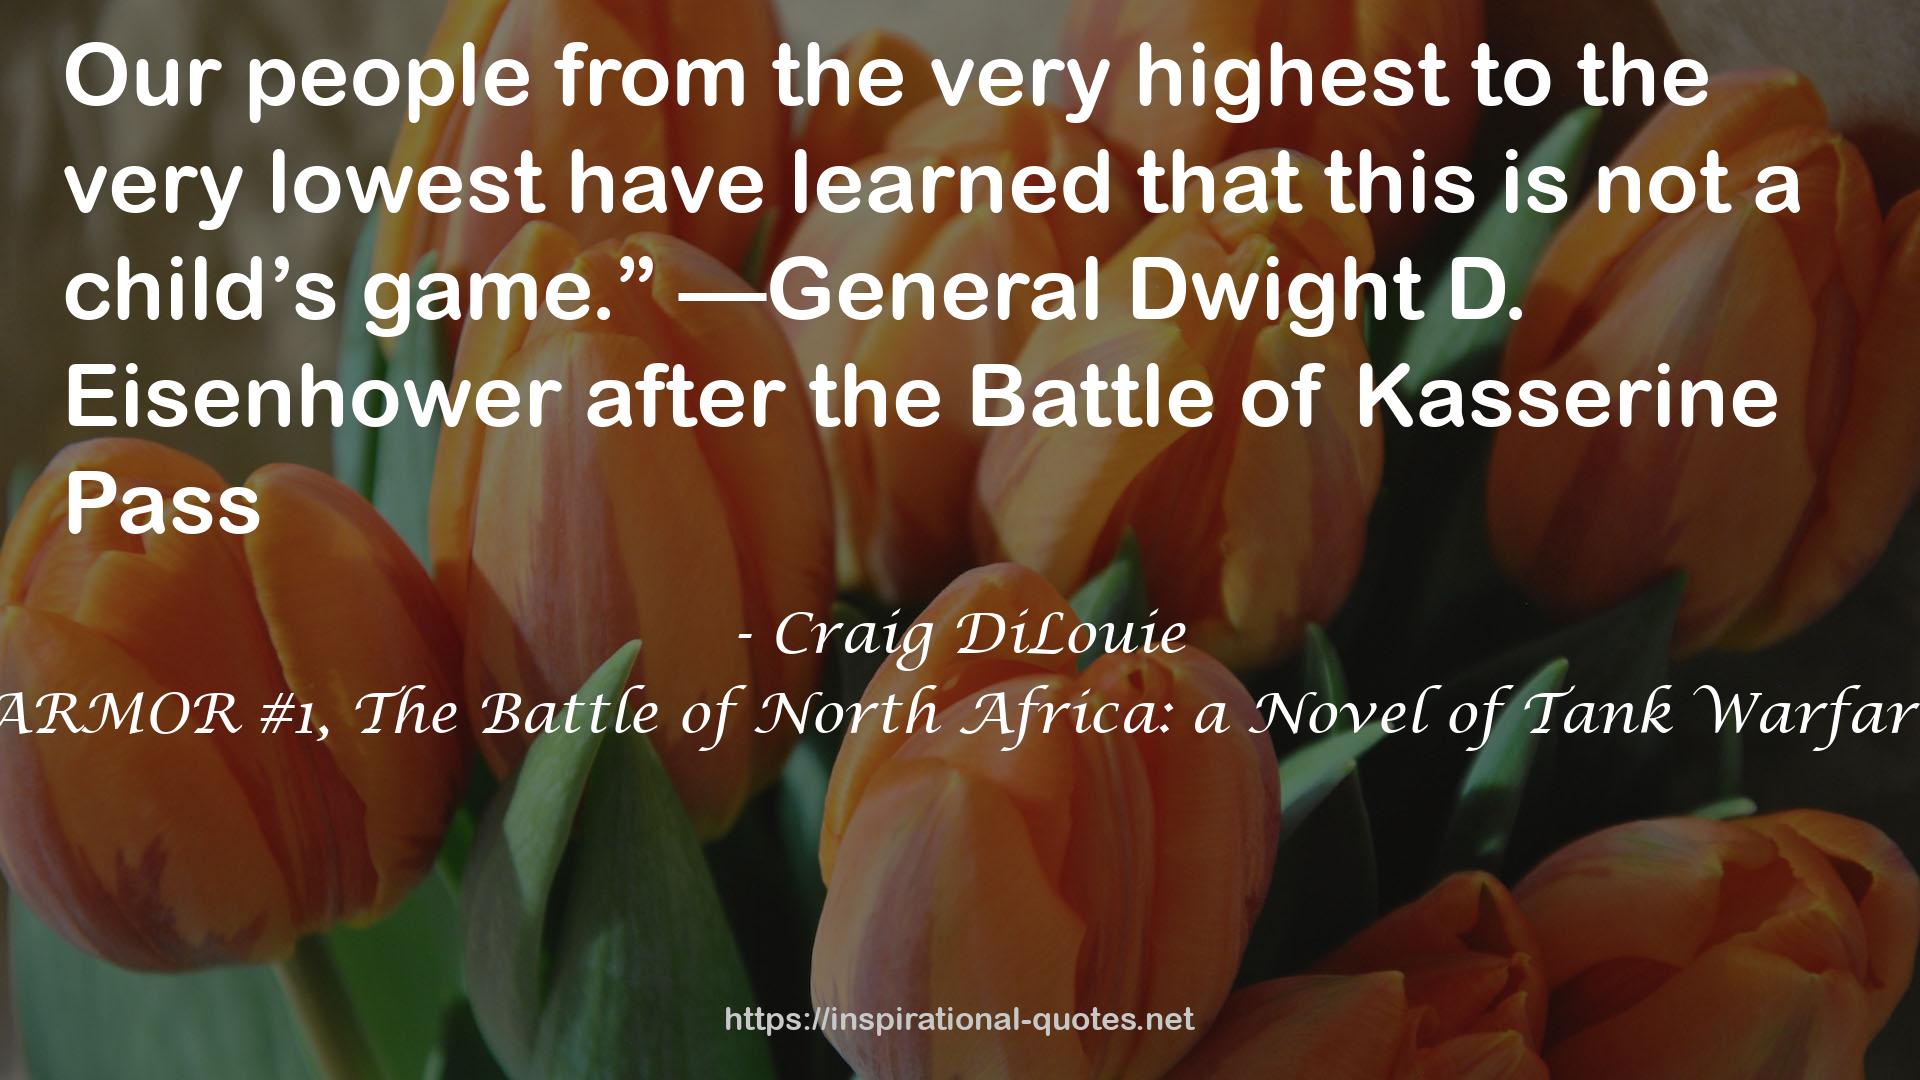 ARMOR #1, The Battle of North Africa: a Novel of Tank Warfare QUOTES